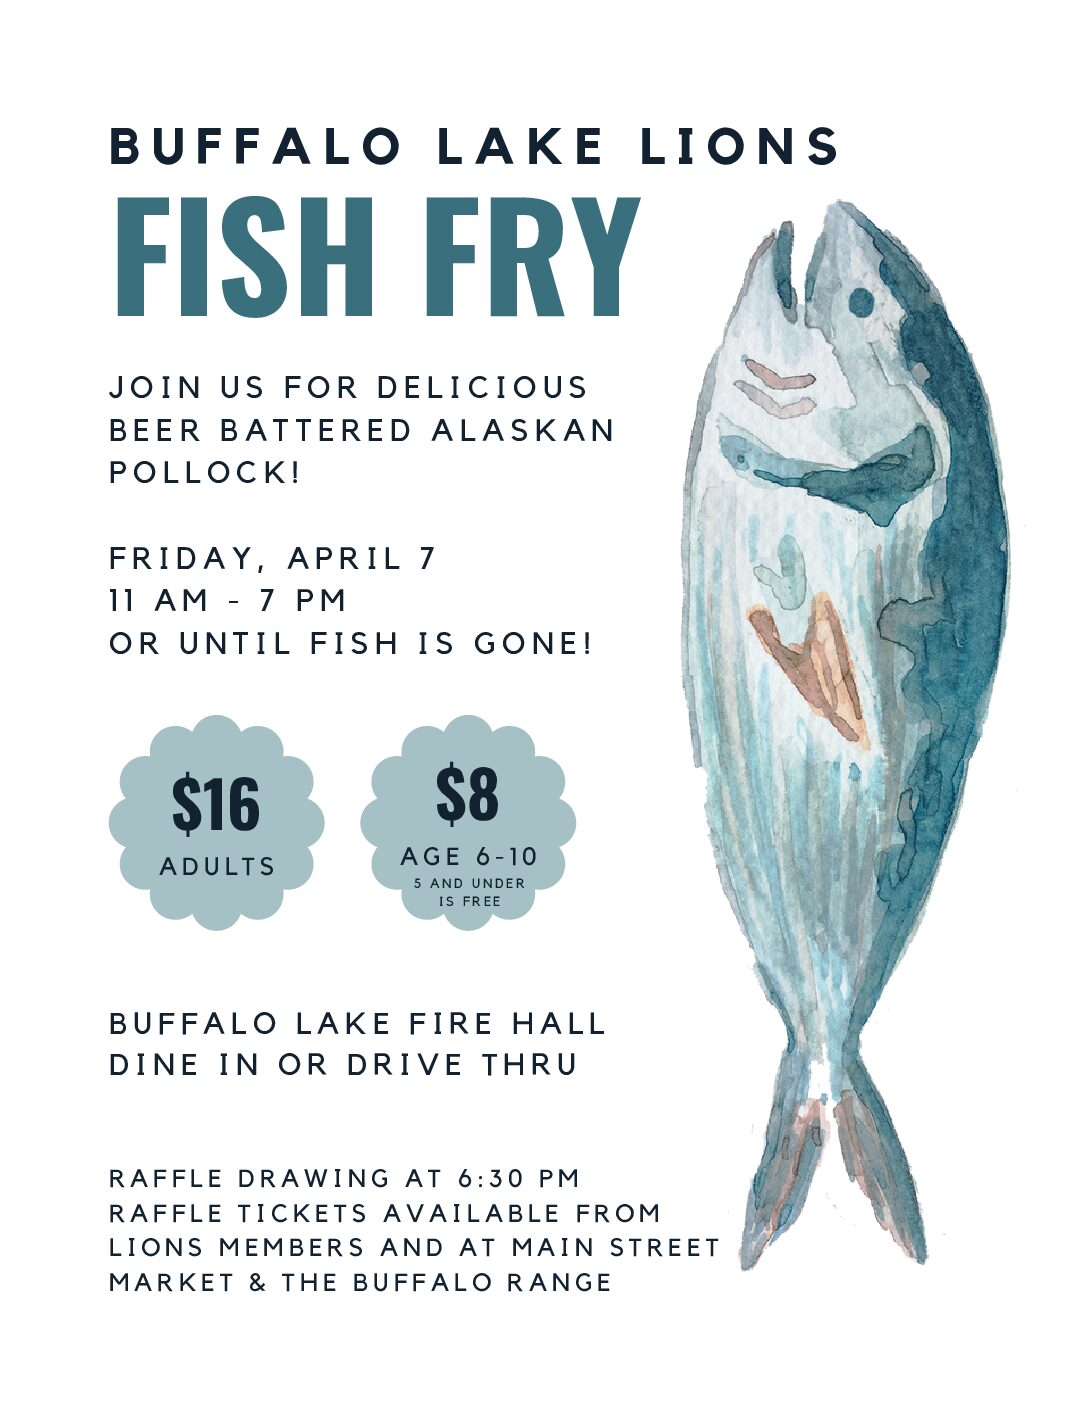 <h1 class="tribe-events-single-event-title">Buffalo Lake Lions Fish Fry</h1>